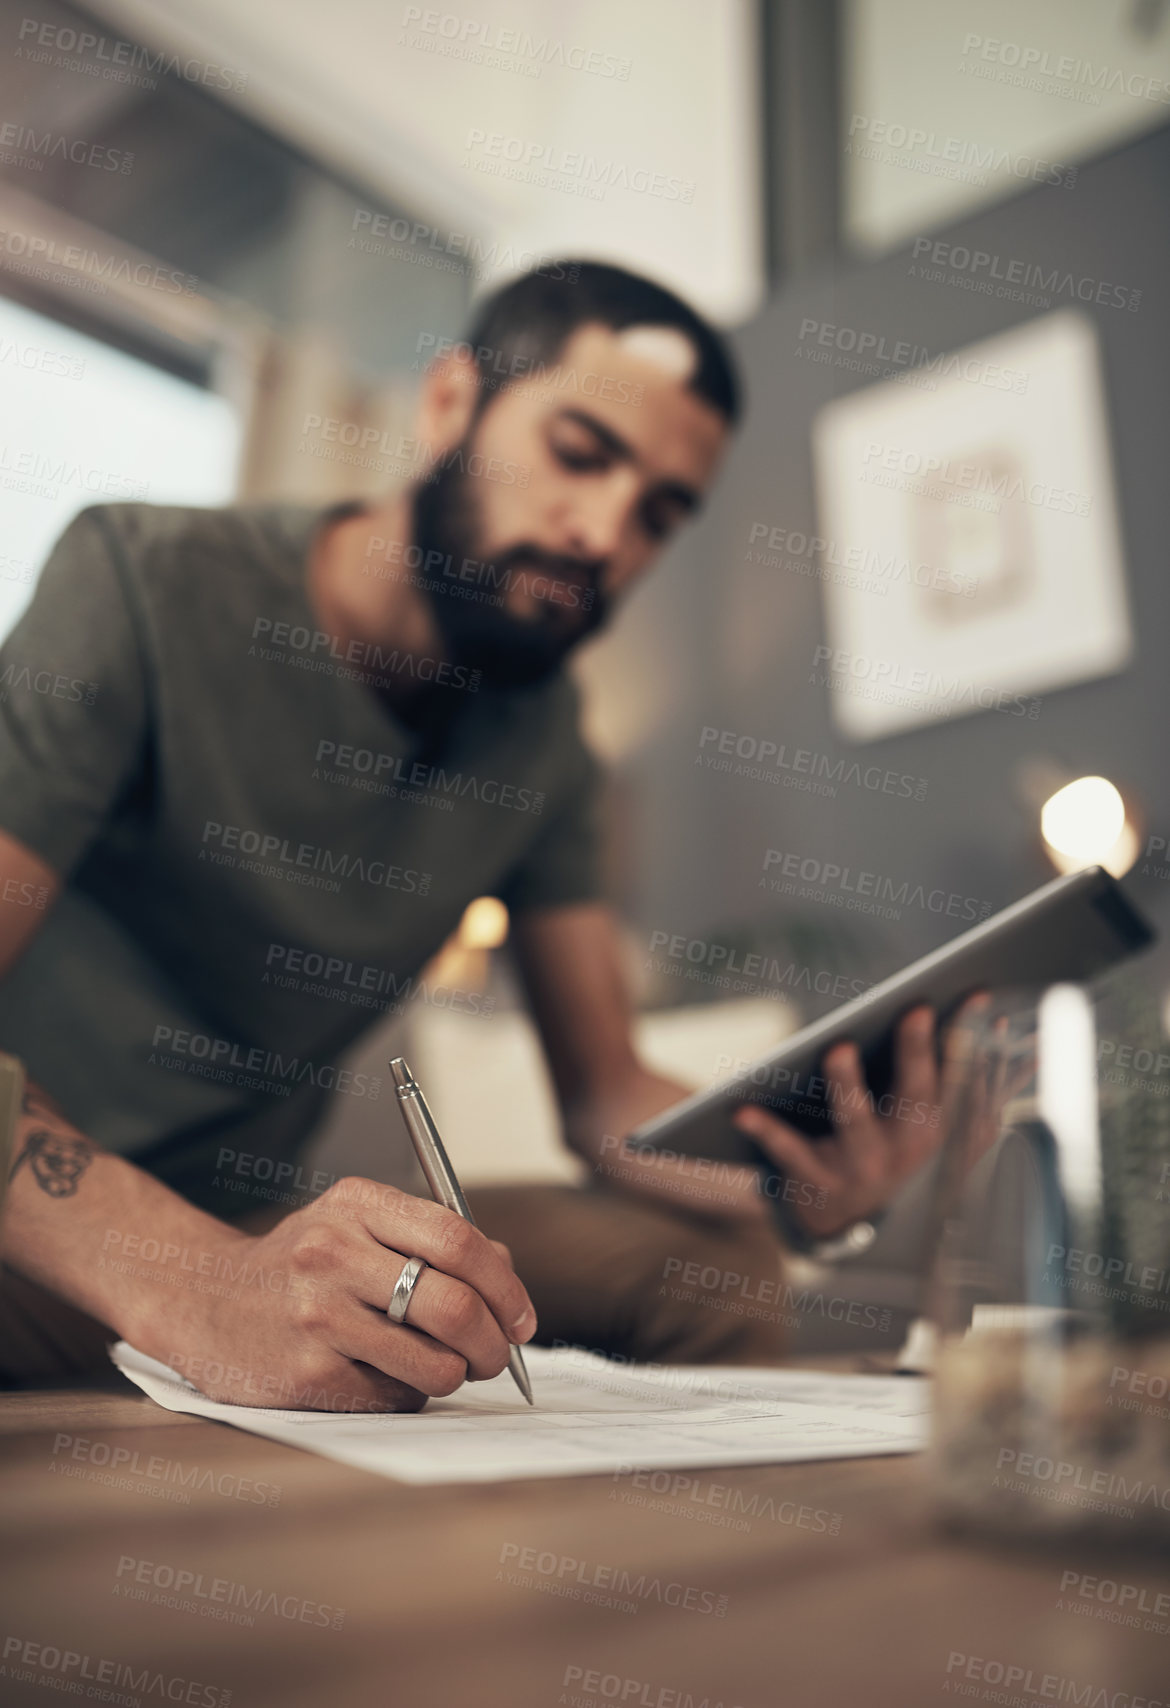 Buy stock photo Shot of a young man using a digital tablet while going through paperwork at home